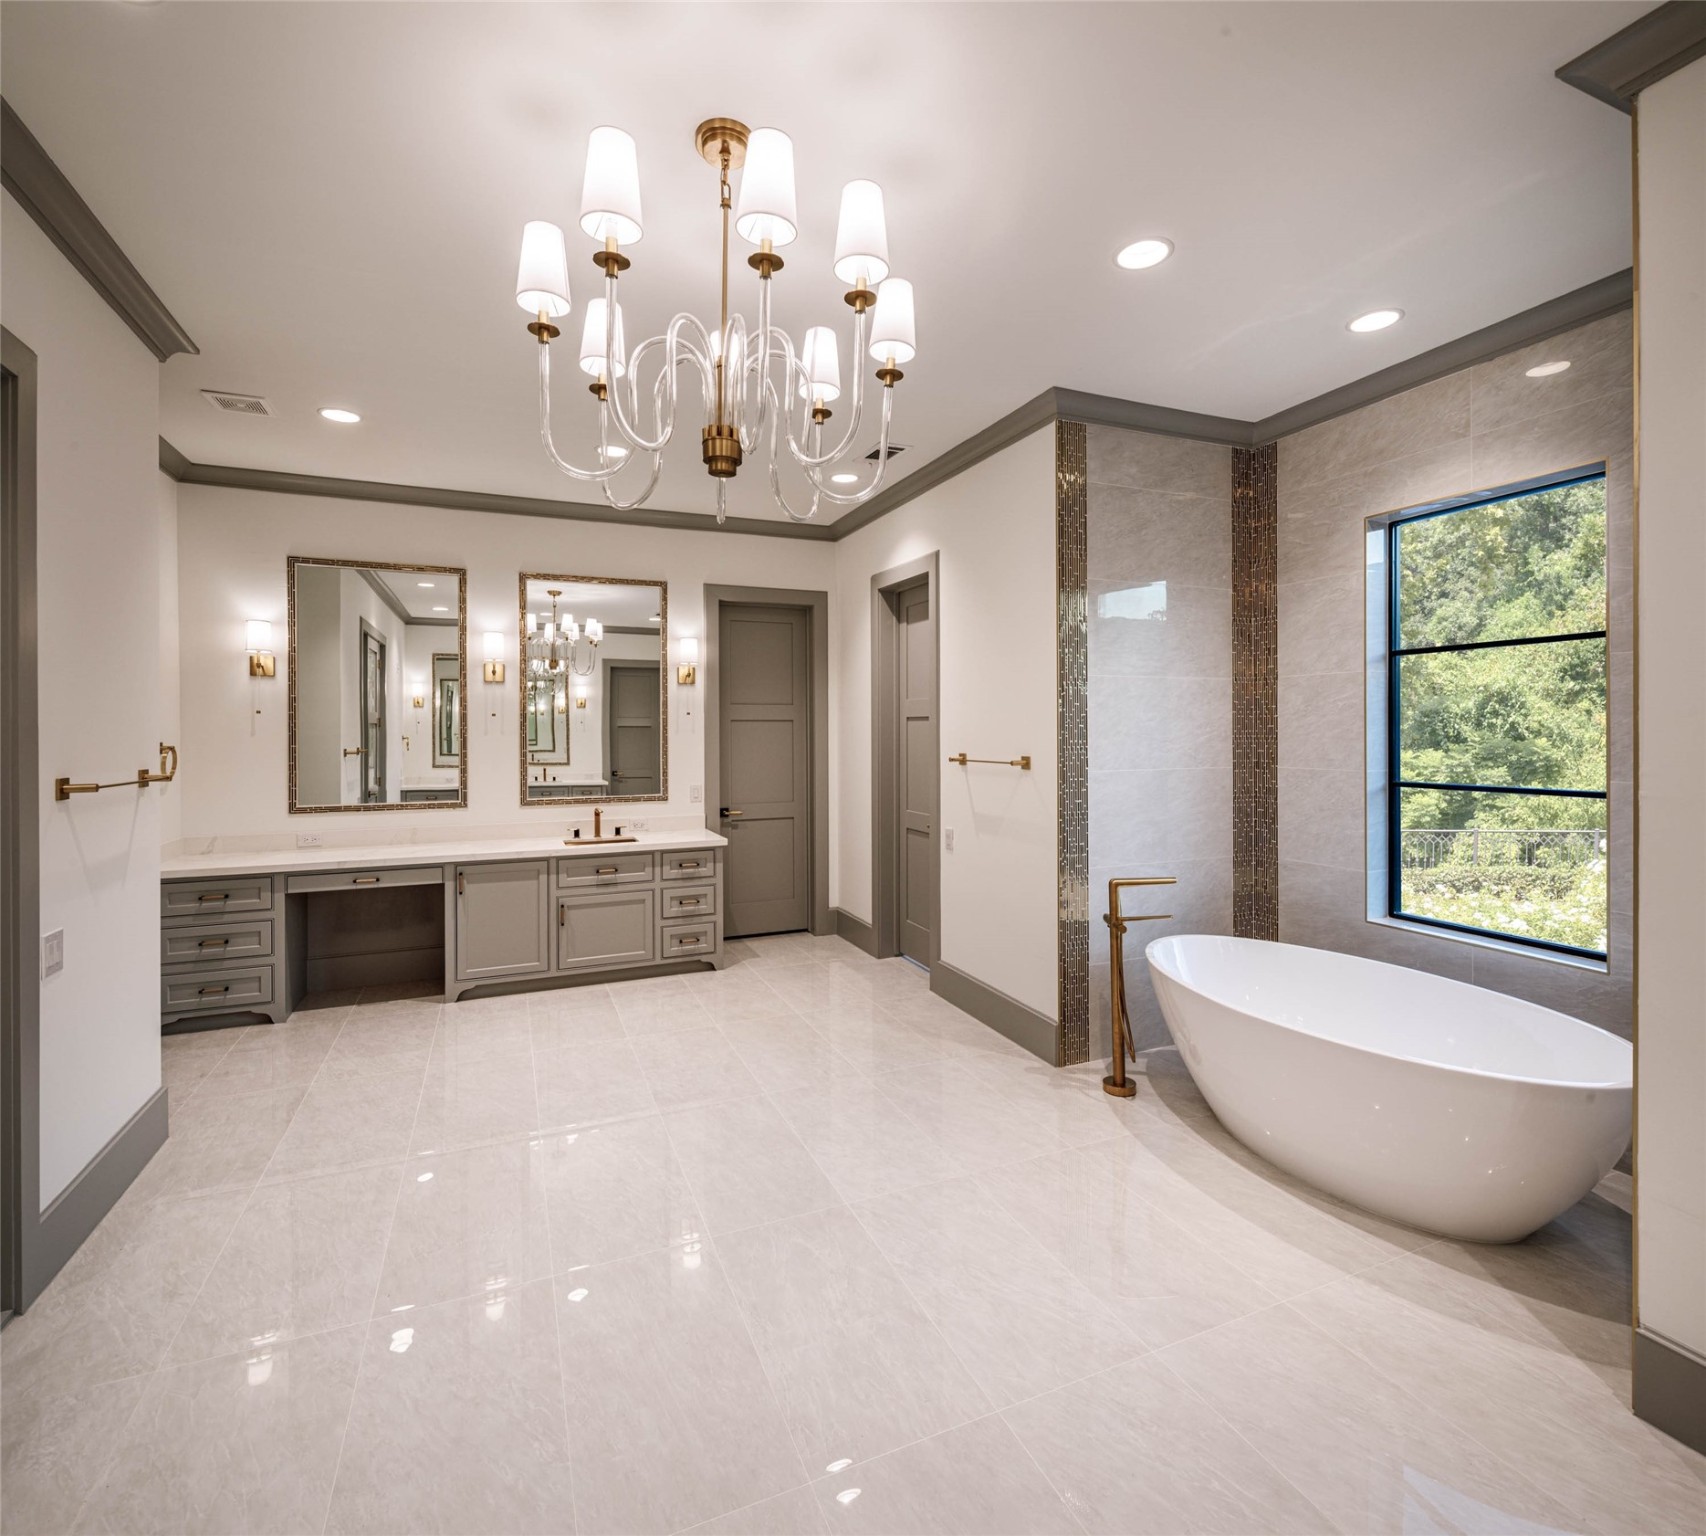 Primary bathroom with HERS side. Make-up vanity, her separate dressing area and water closet. . Porcelain soaking tub under a window with West exposure,  Designer polished hardware, framed mirrors with elegant tile details, wall sconces and custom built-ins